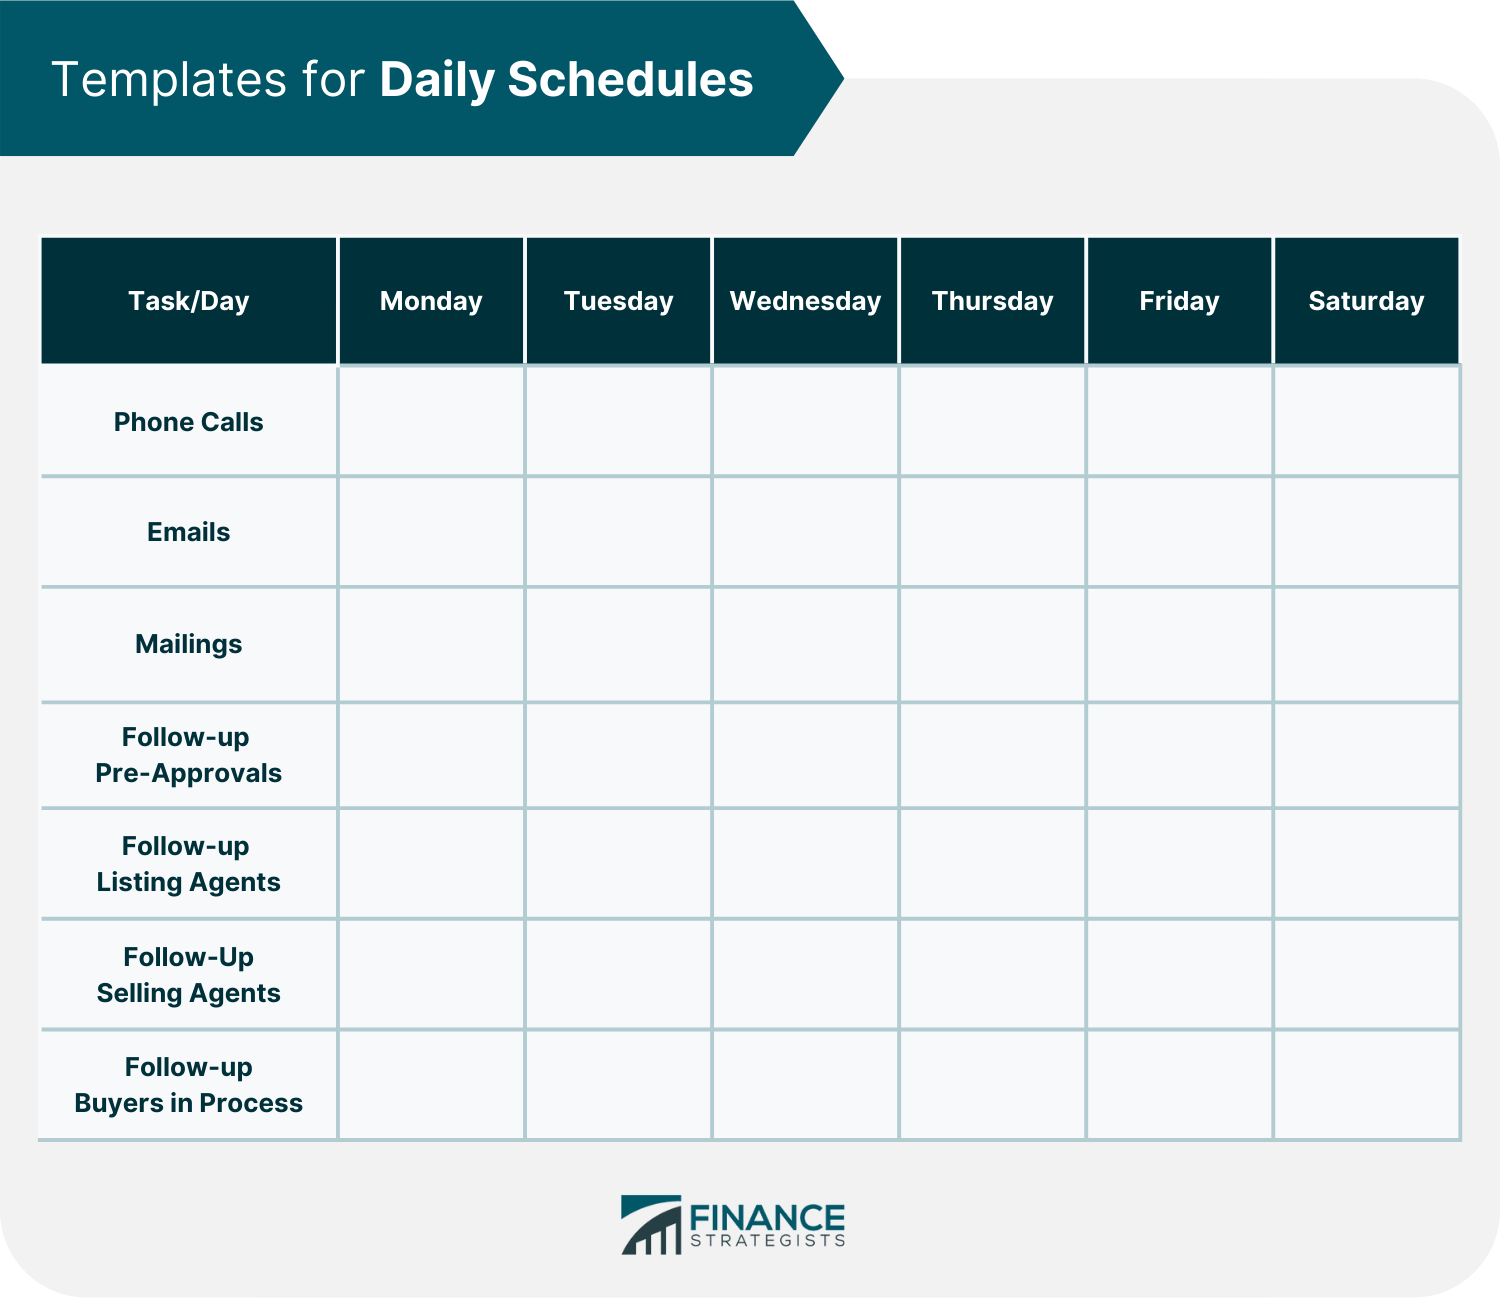 Templates for Daily Schedules